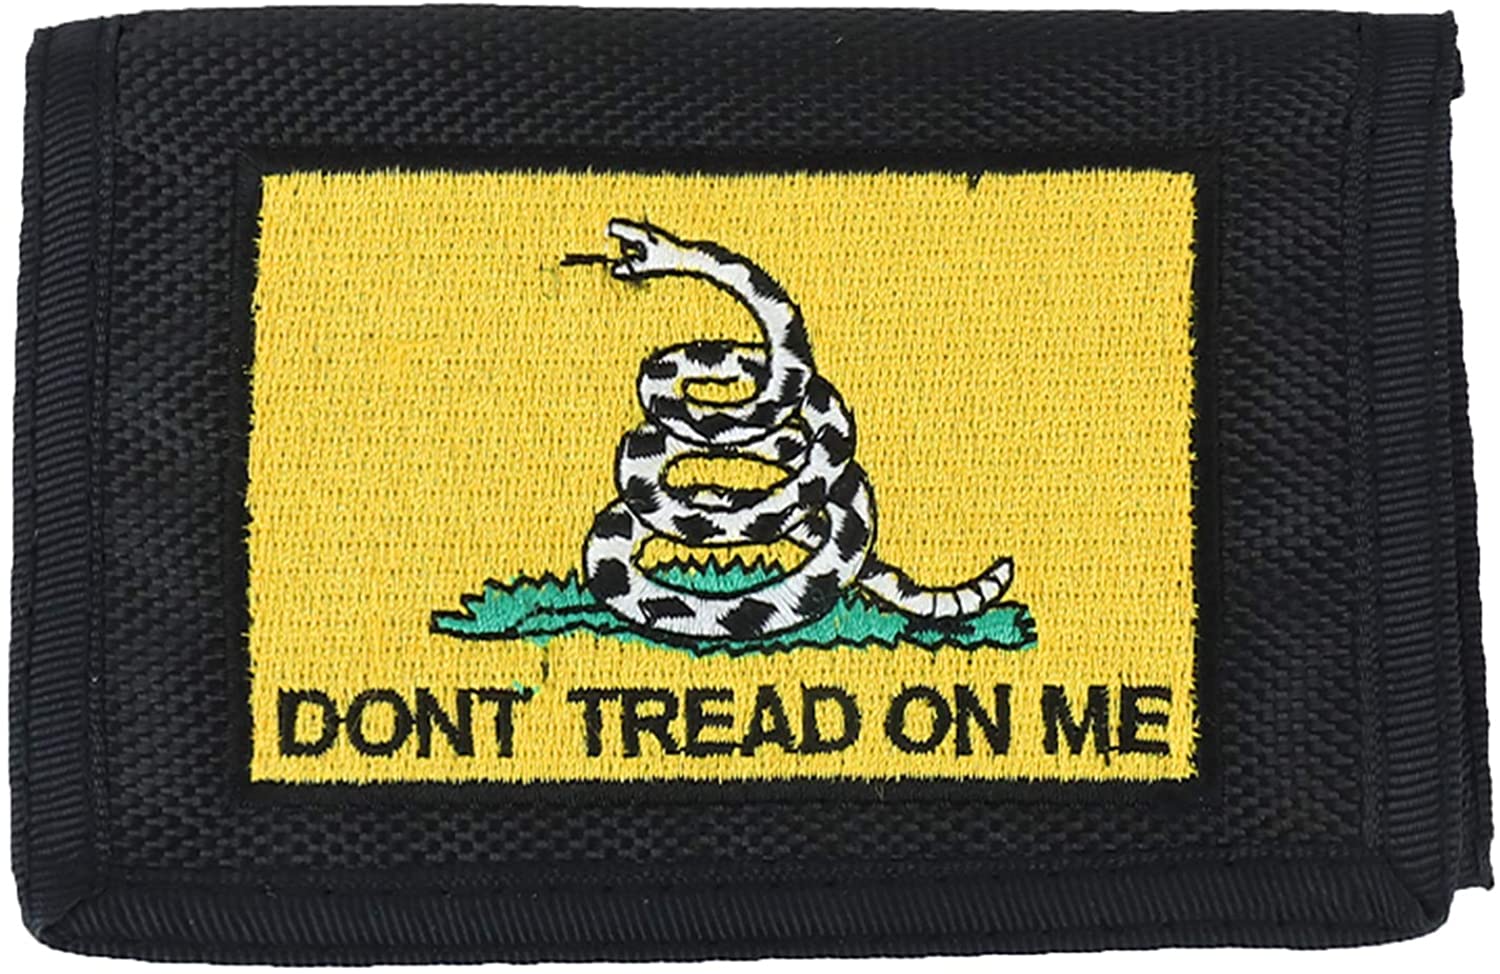 Armycrew Military Theme Embroidered Trifold Wallet